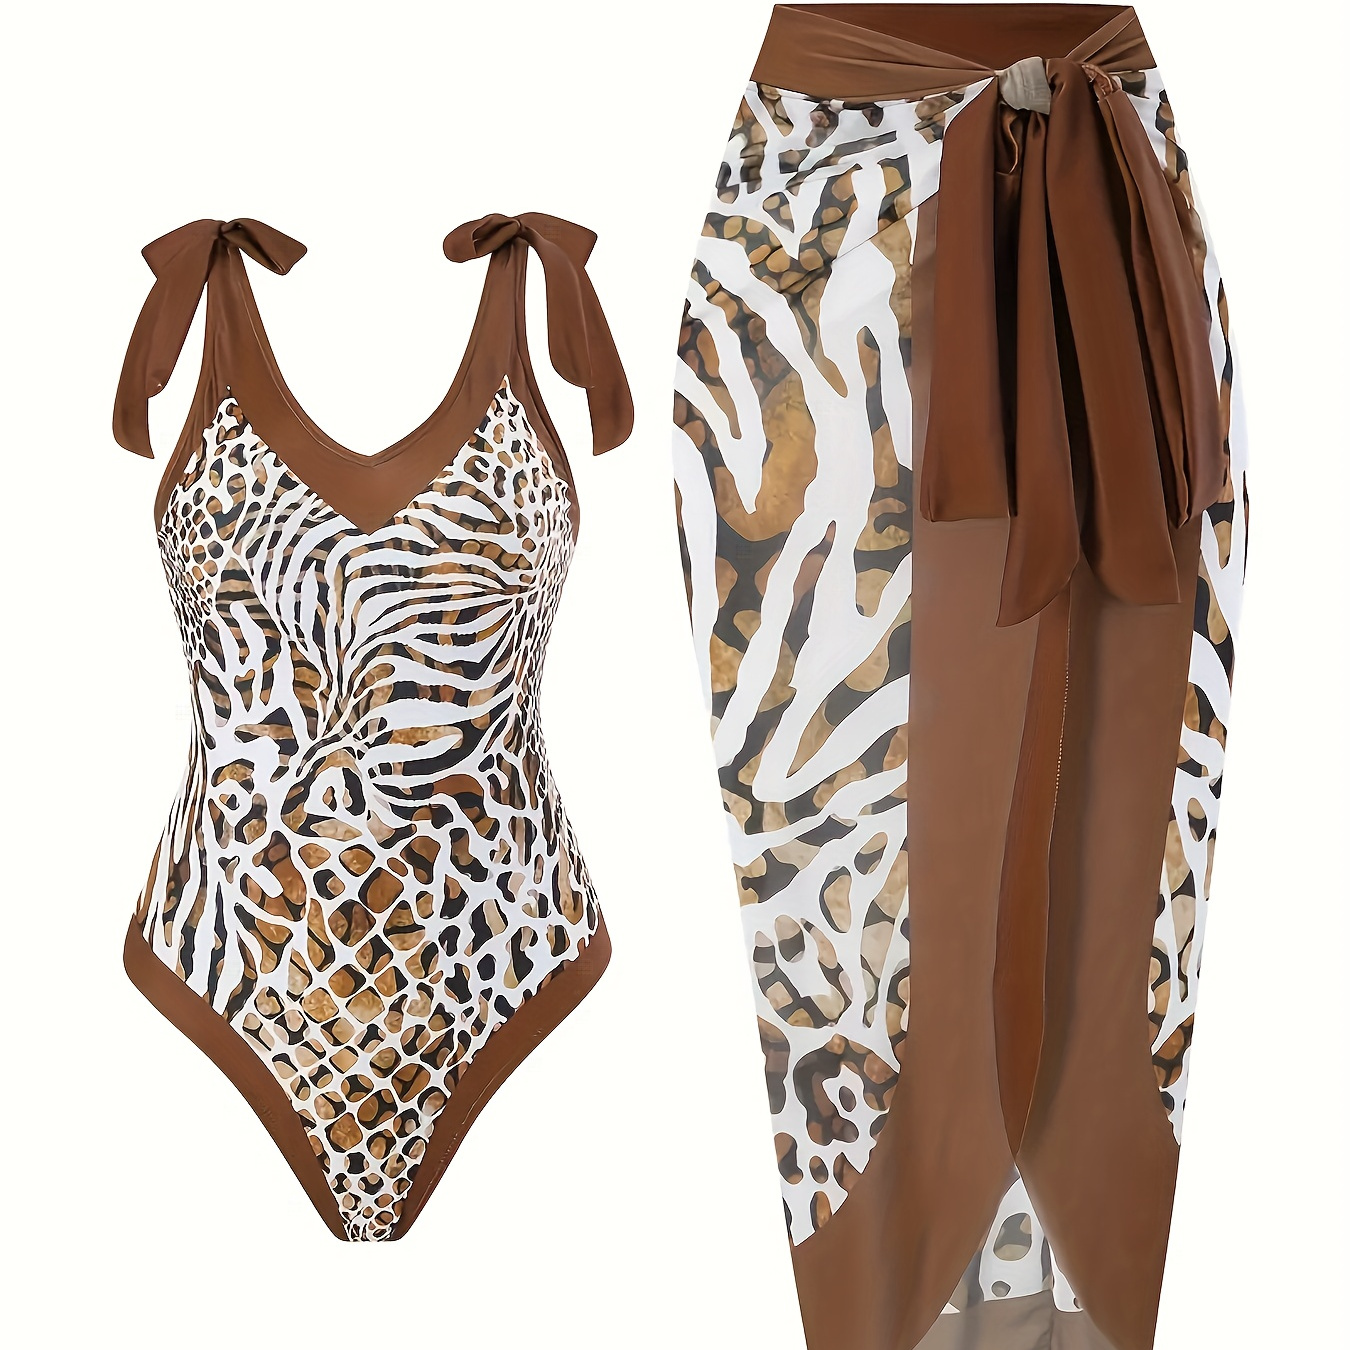 

Women's Modest One-piece Swimsuit With Cover Up, Plus Size Zebra Leopard Print V Neck Bowknot Beach One-piece Bathing-suit & Cover Up Skirt 2 Piece Set